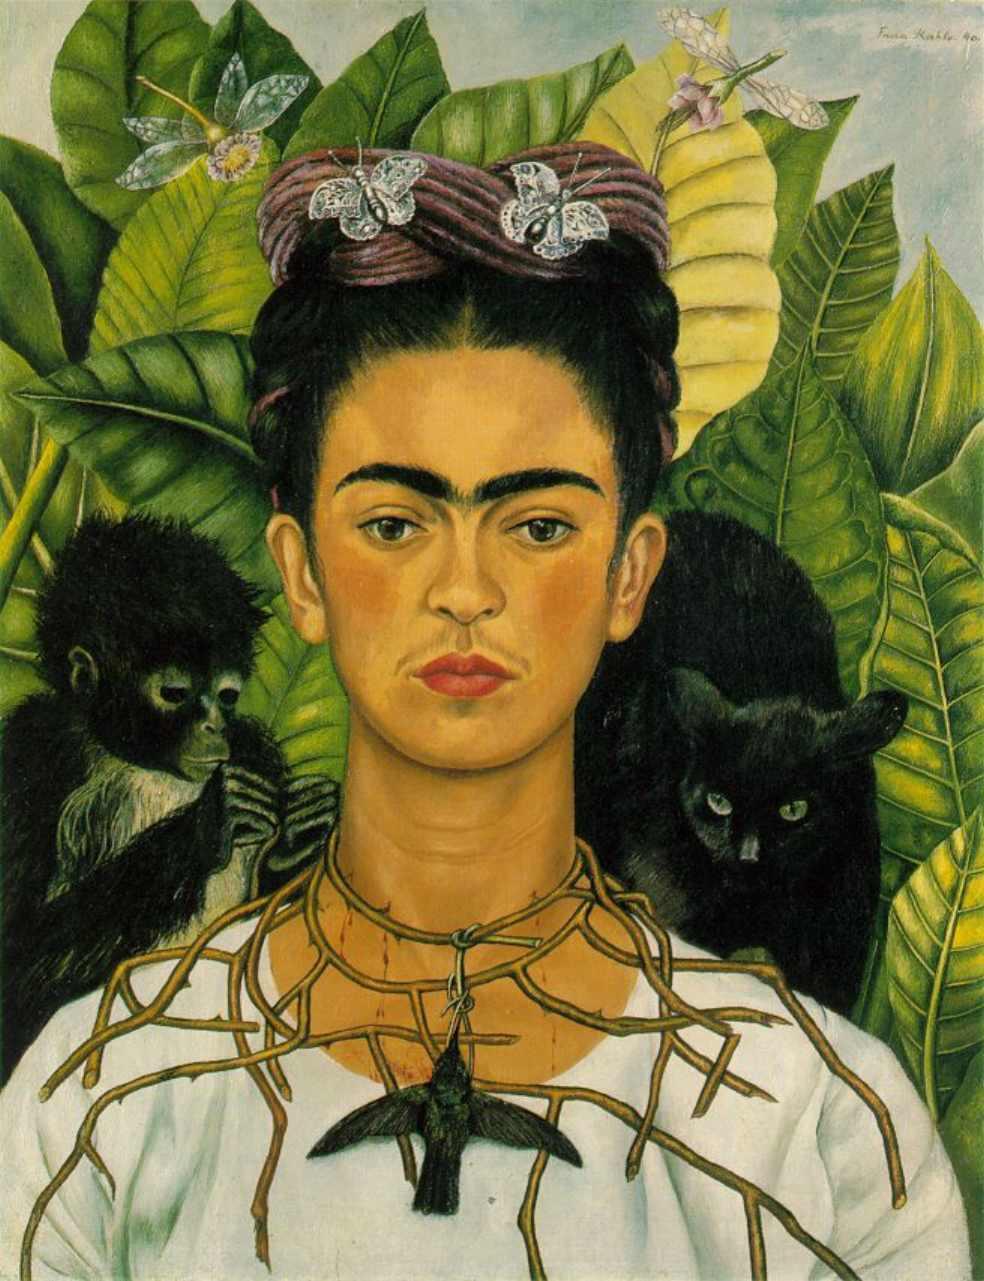 1940 - Frida Kahlo Self-portrait SELF-PORTRAITS A self-portrait is a representation of an artist, drawn, painted, sculpted, or photographed, by